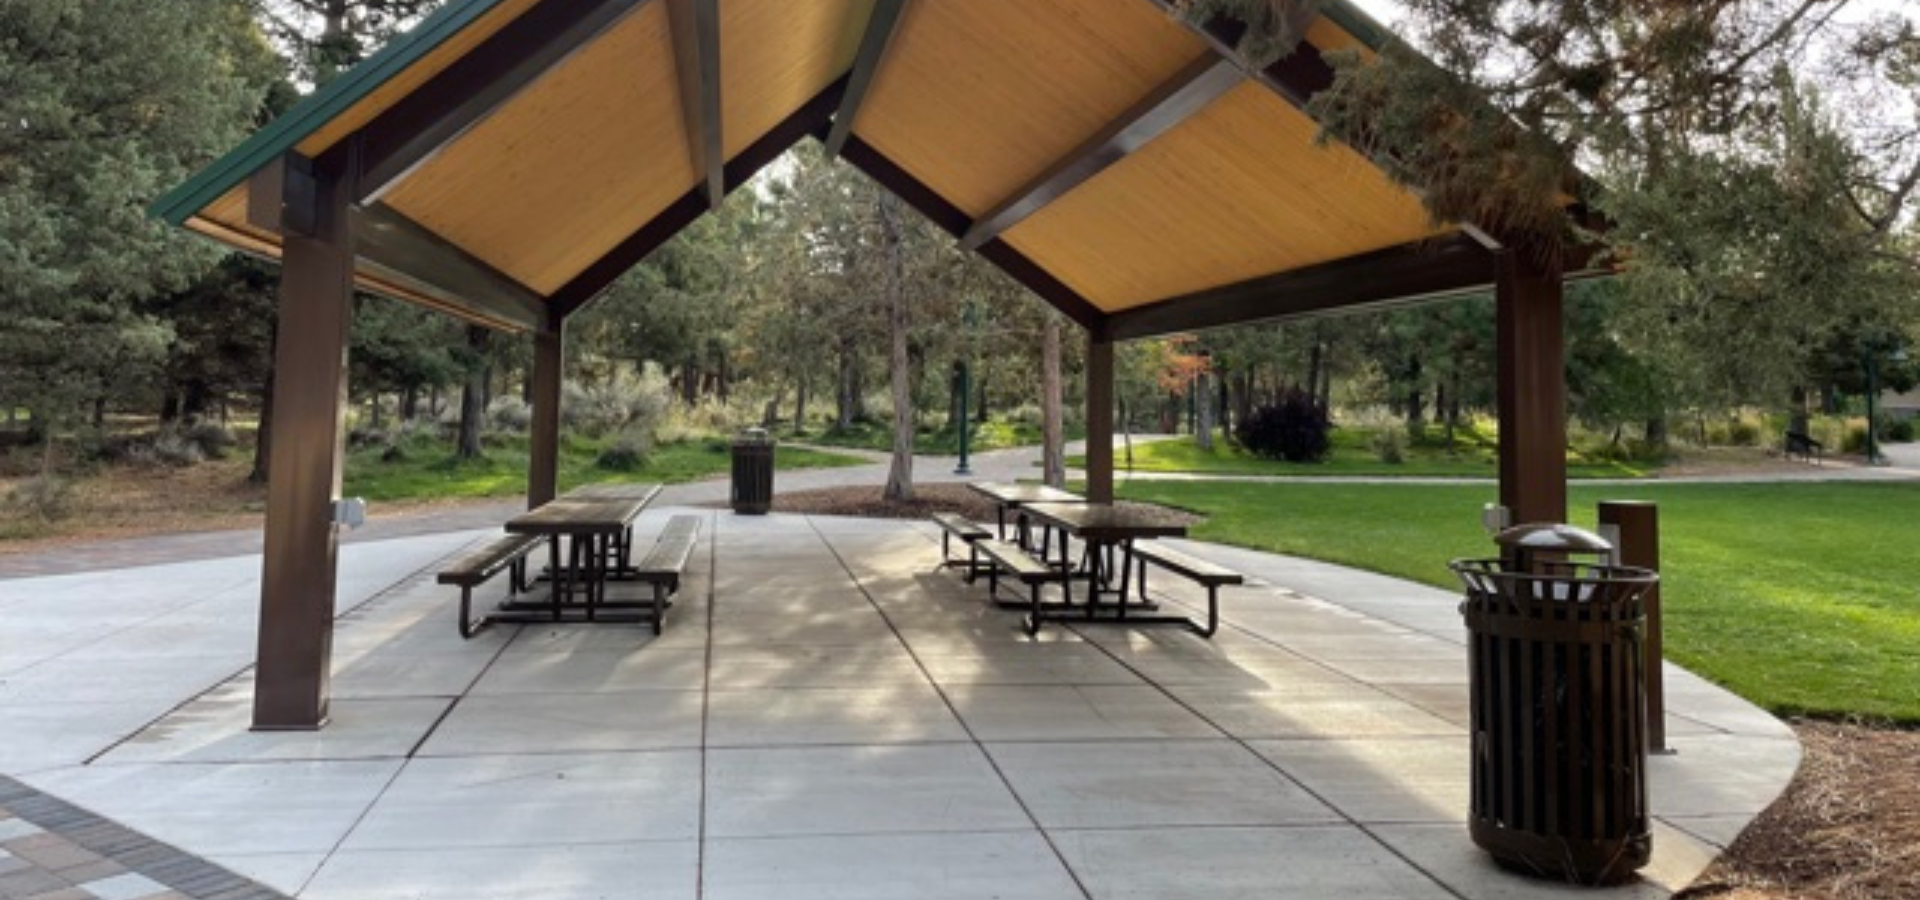 view of park benches under the picnic shelter at Larkspur park, trees and green lawn in the background